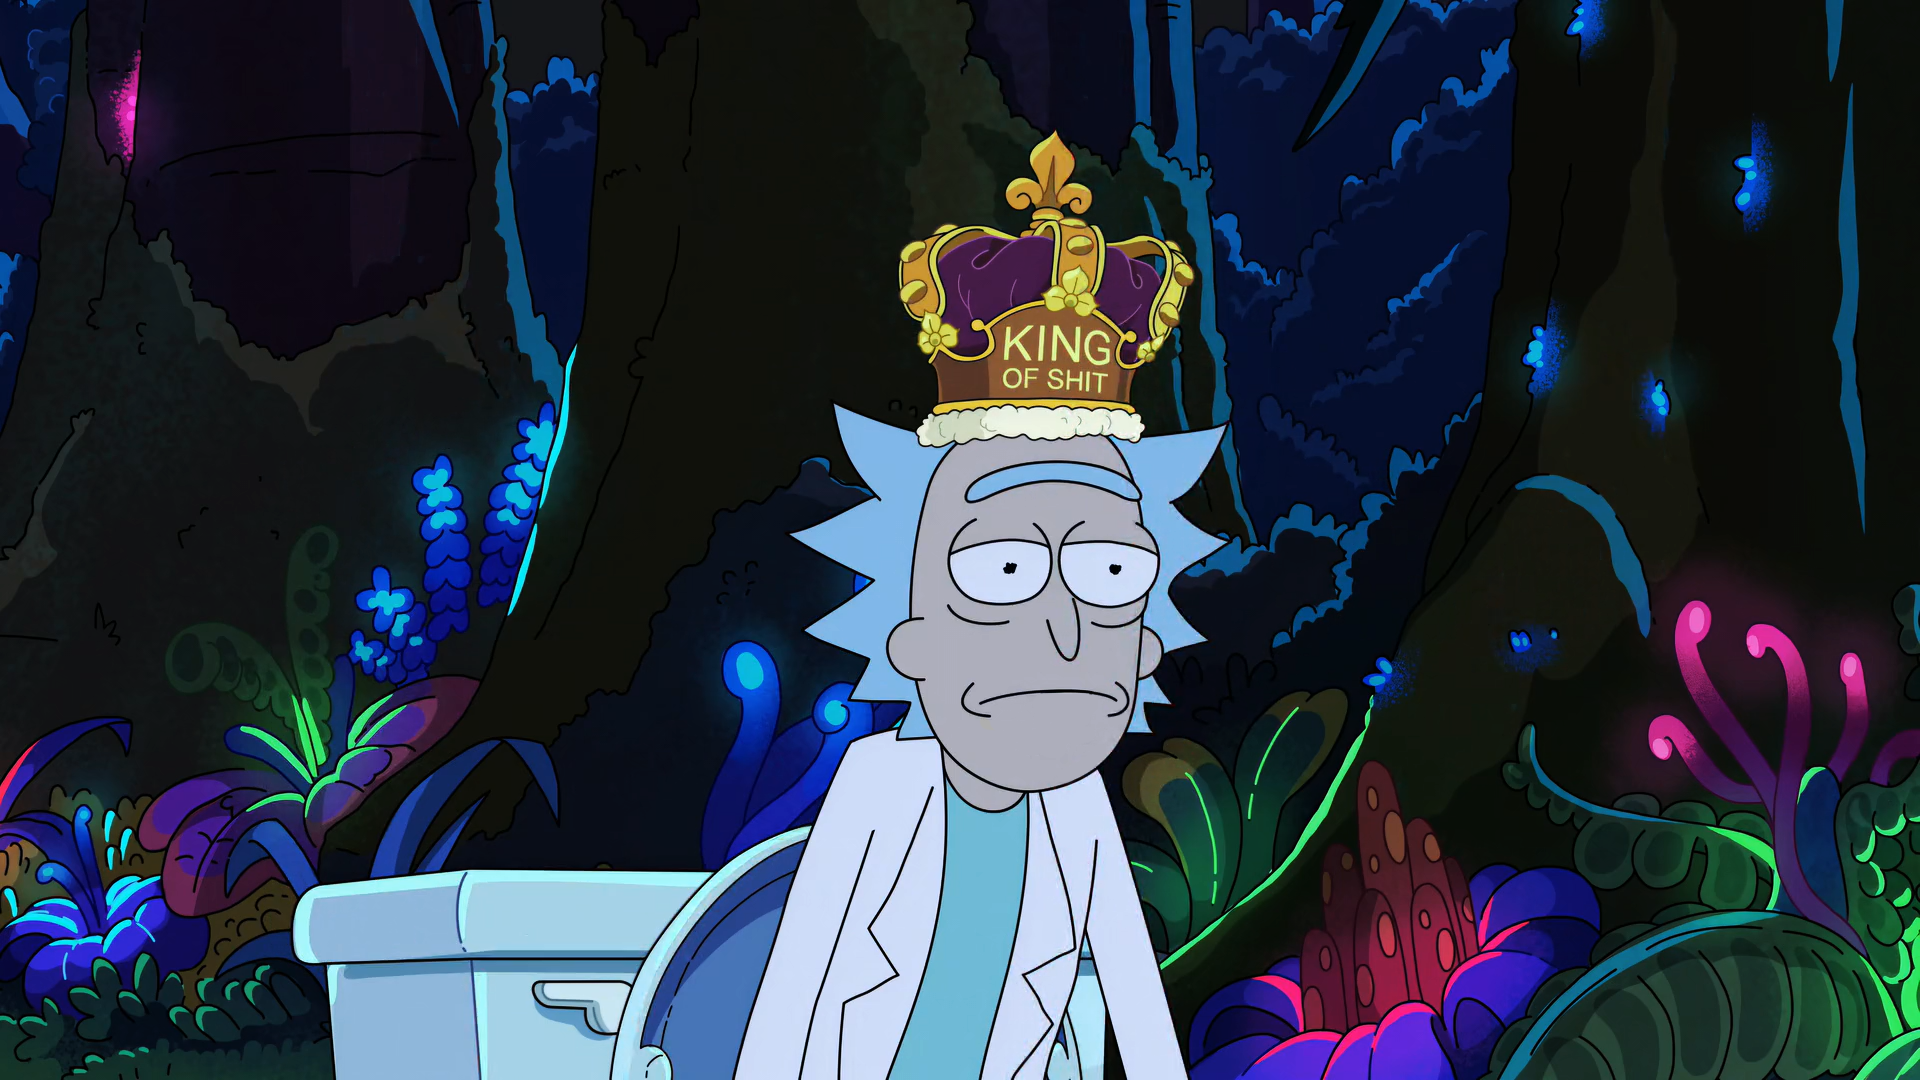 General 1920x1080 Rick and Morty animated character cartoon